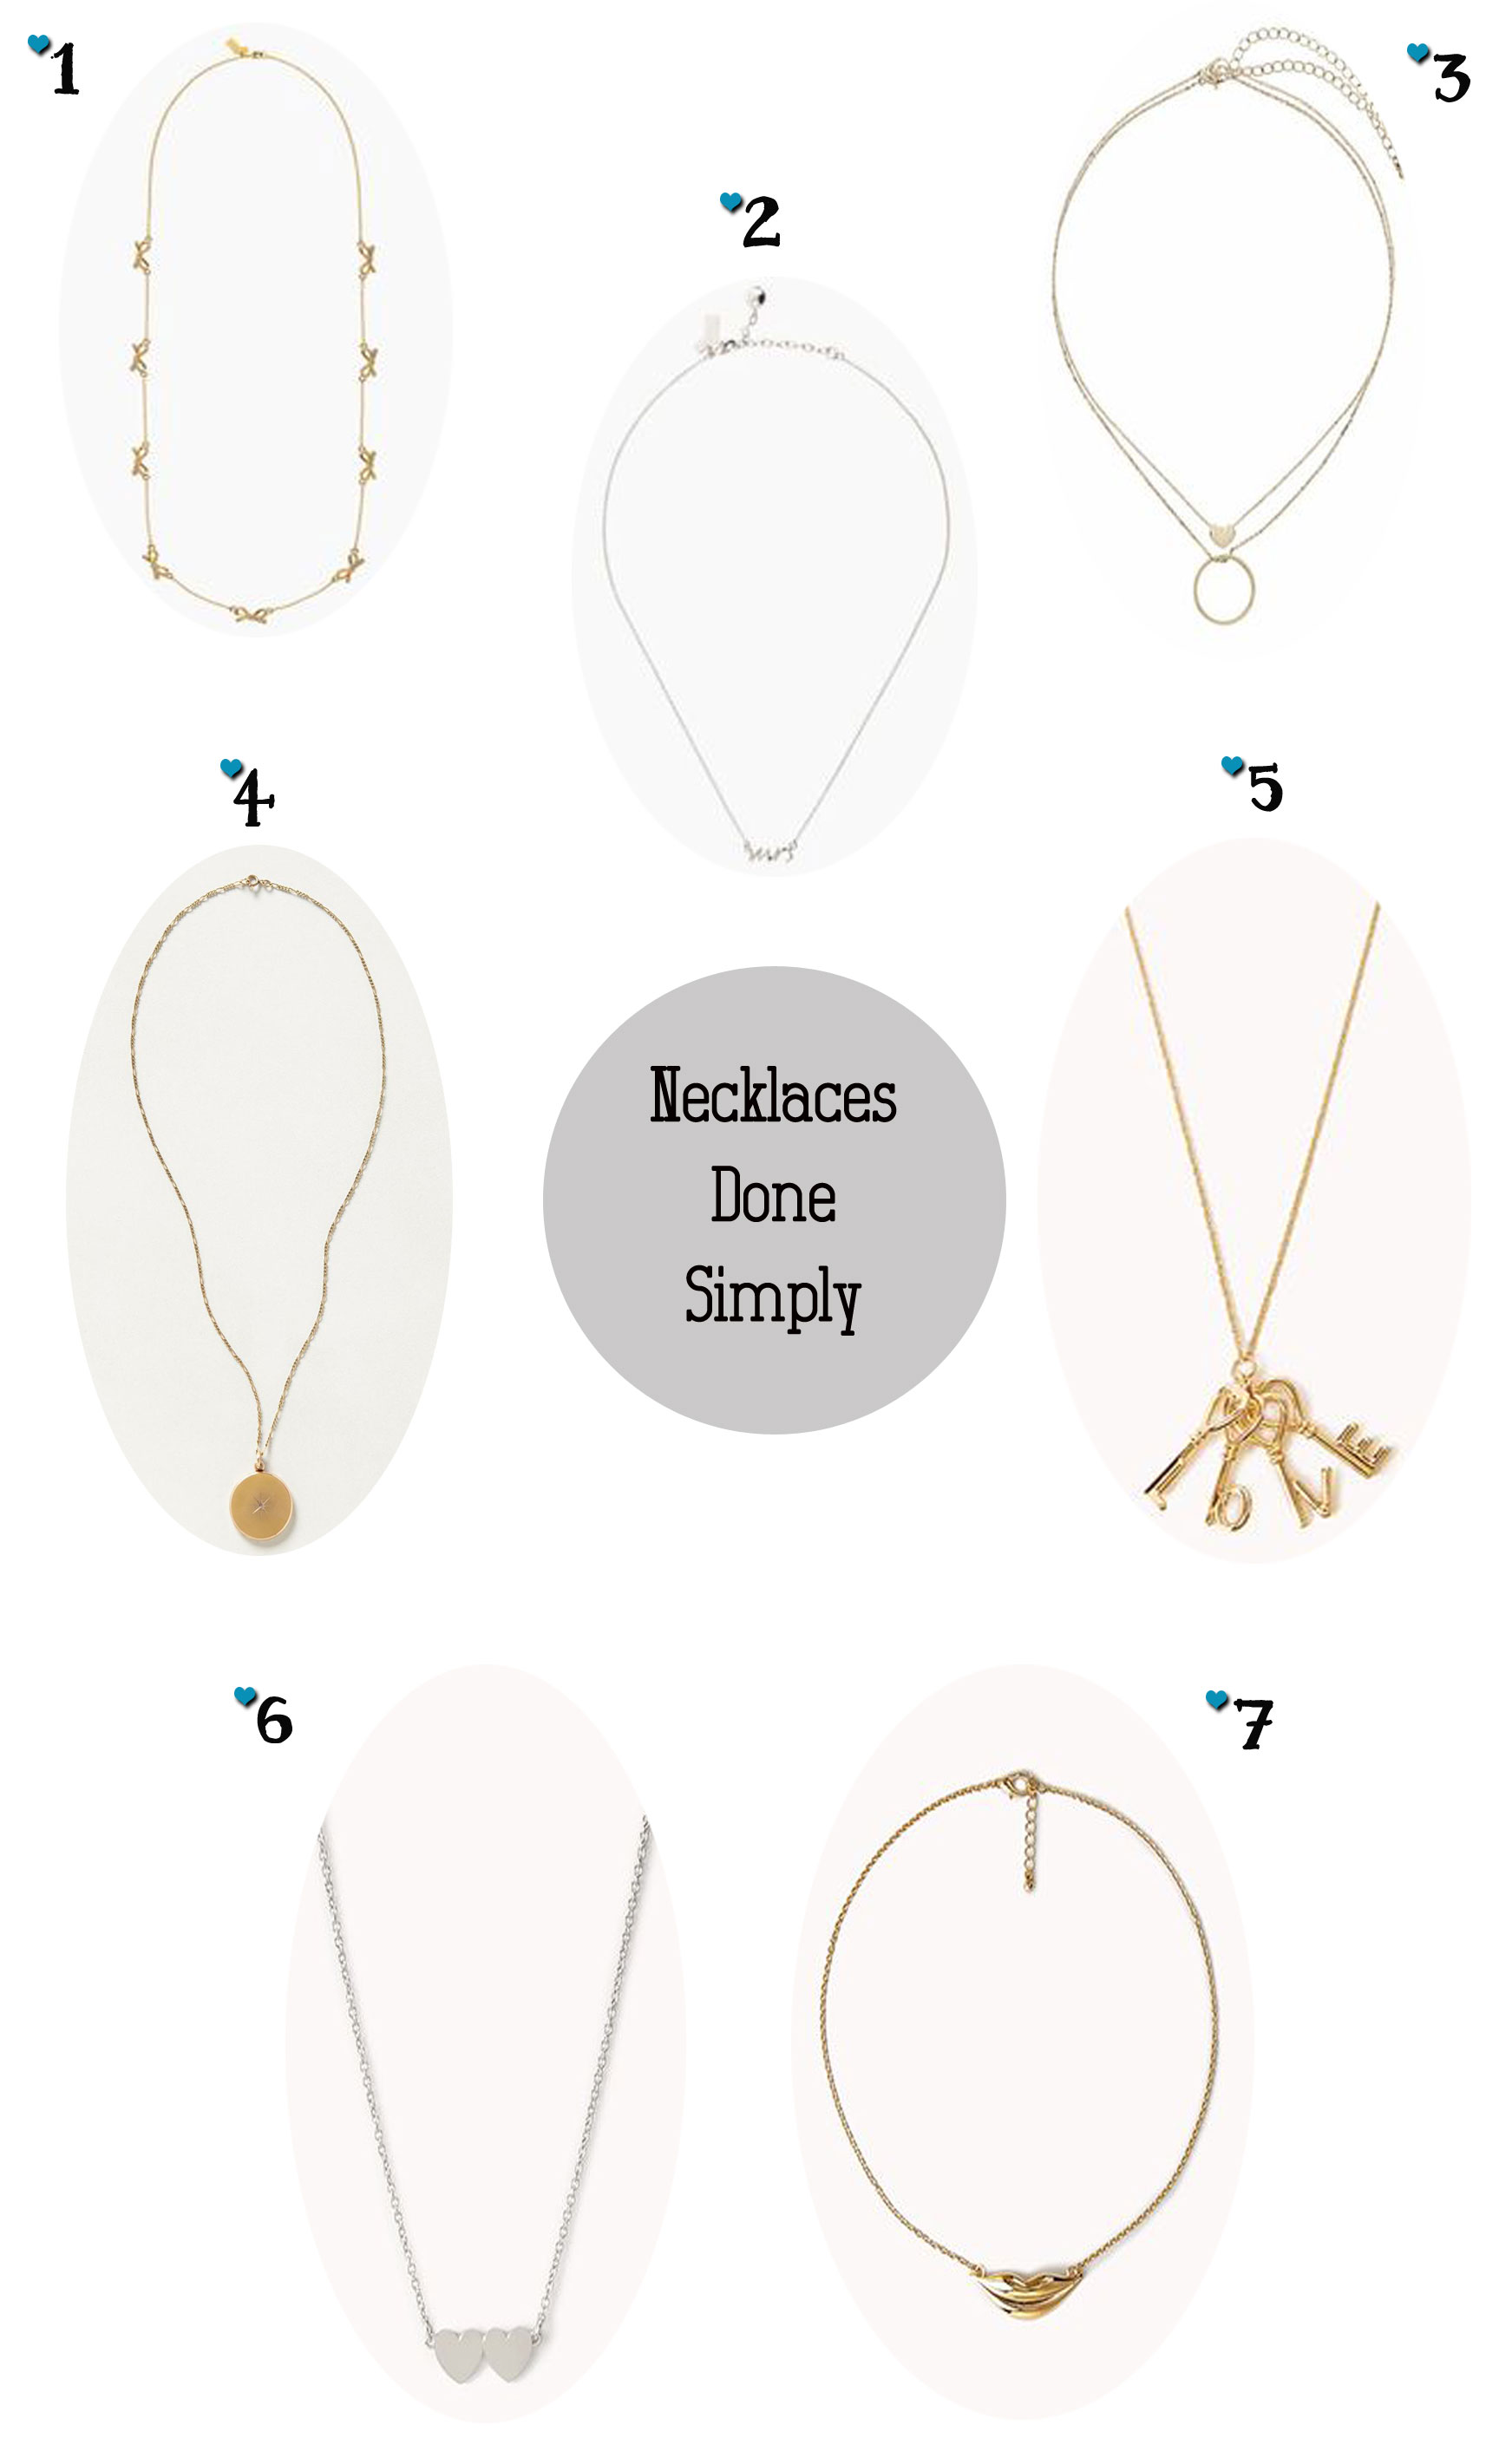 Necklaces with a Simple Statement